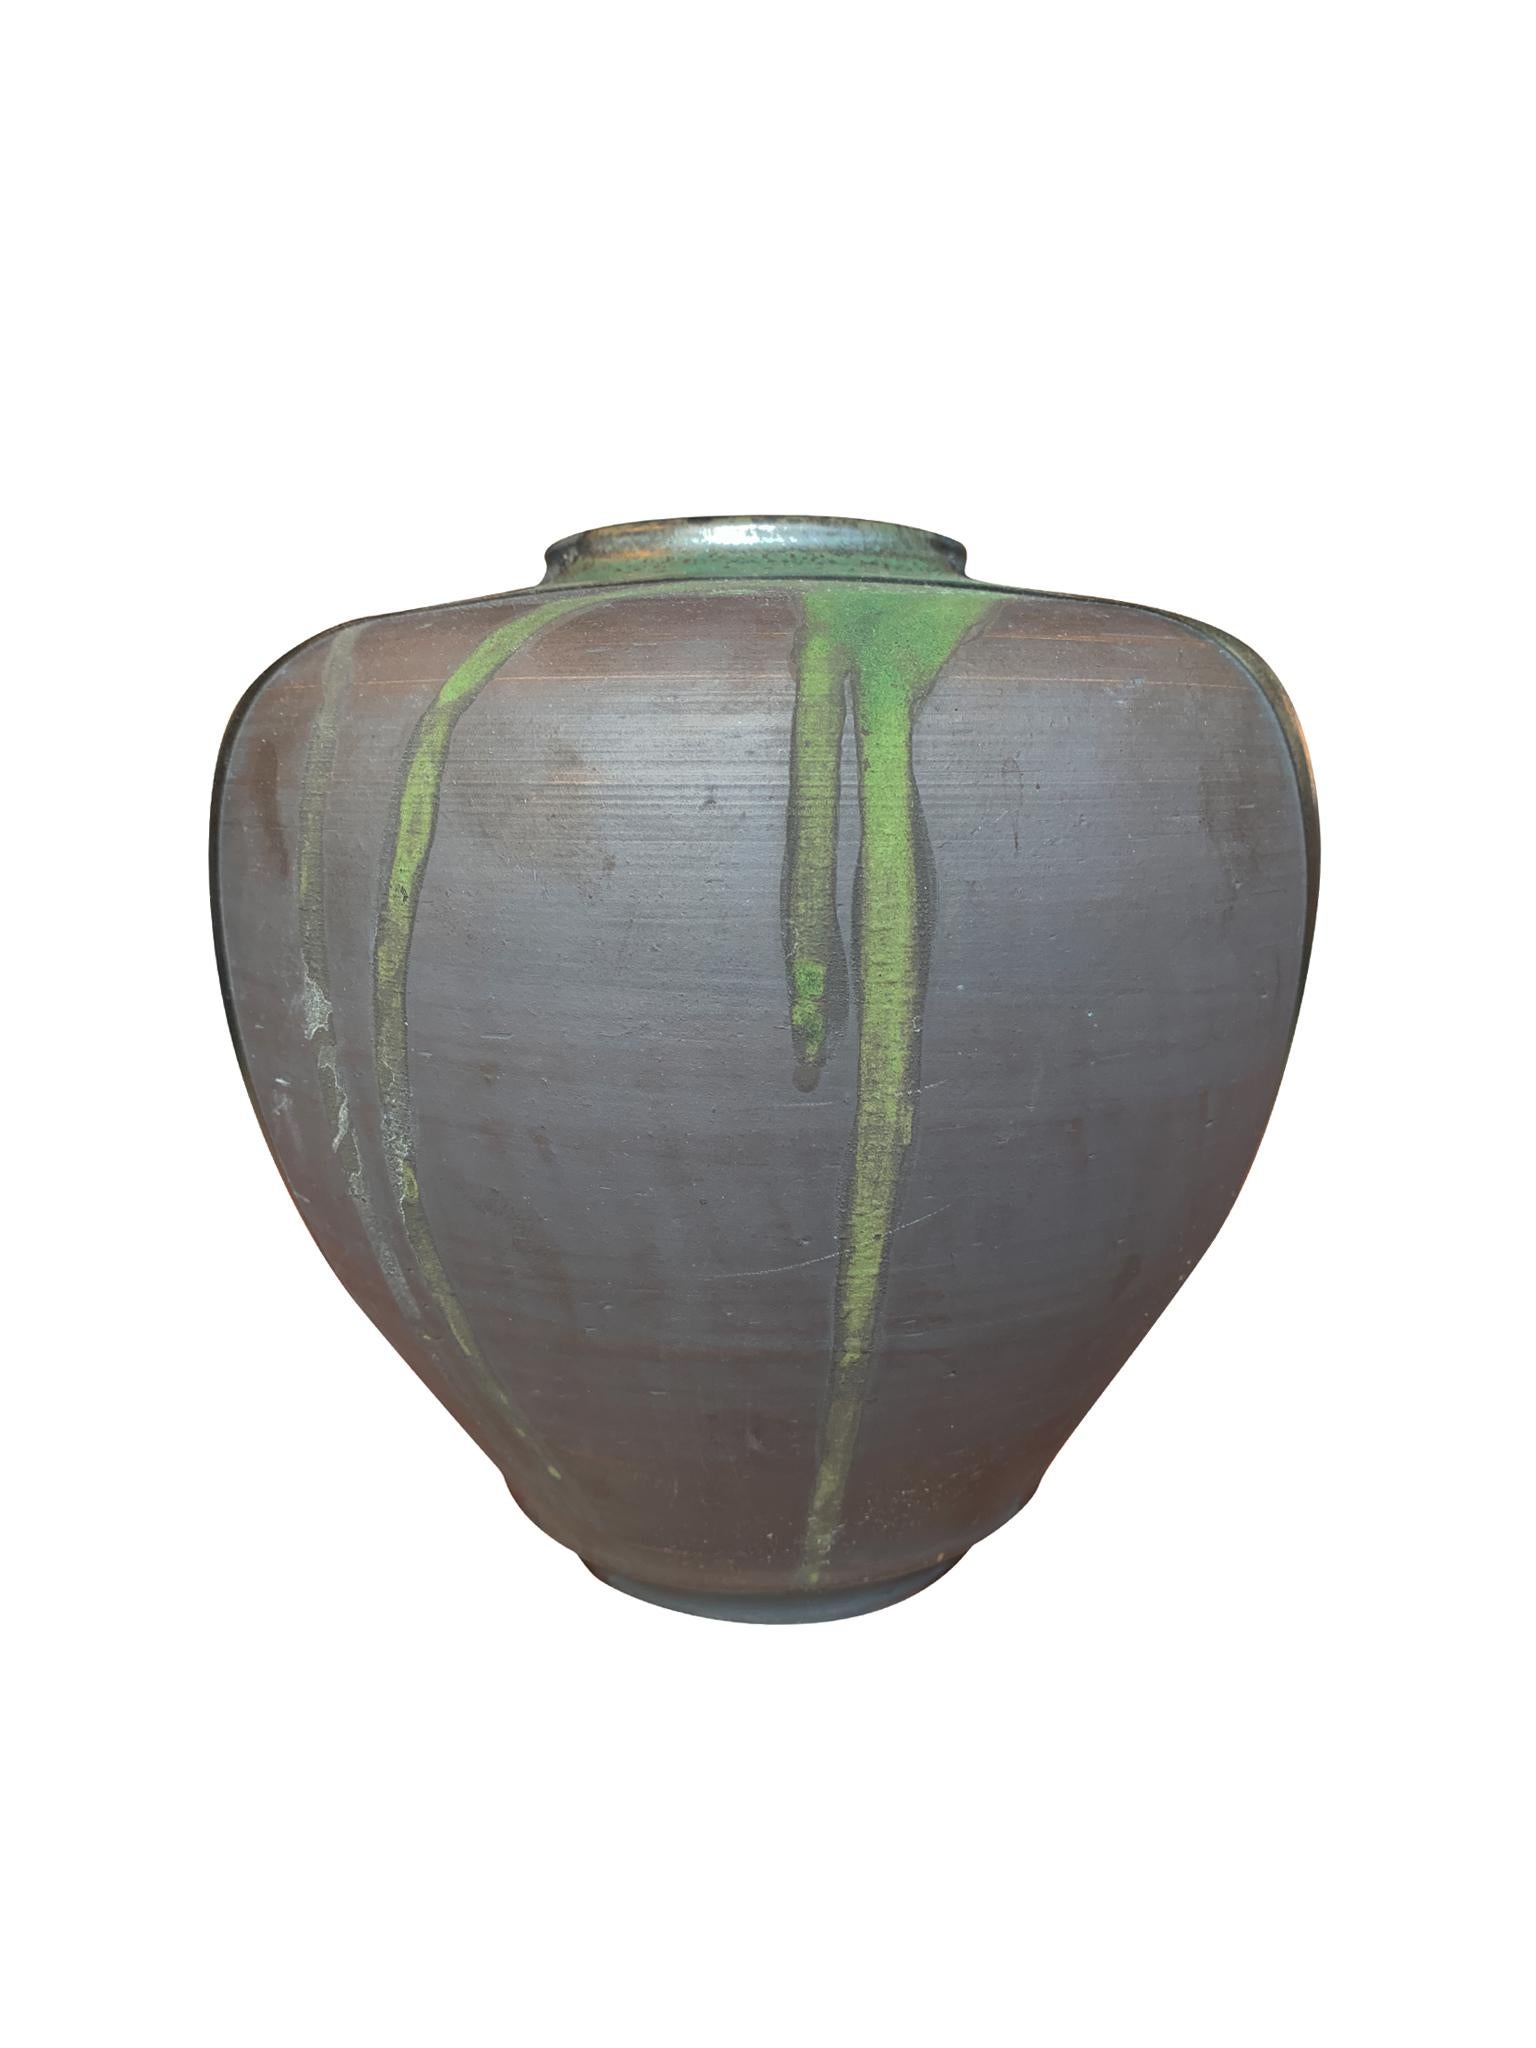 A Thom Lussier ceramic vase with a rotund shape. The vase is one of a series of vessels on which the artist applies a mixture of glazing techniques to create richly textured surfaces. Here, he combines metallic glazing with a matte finish. The